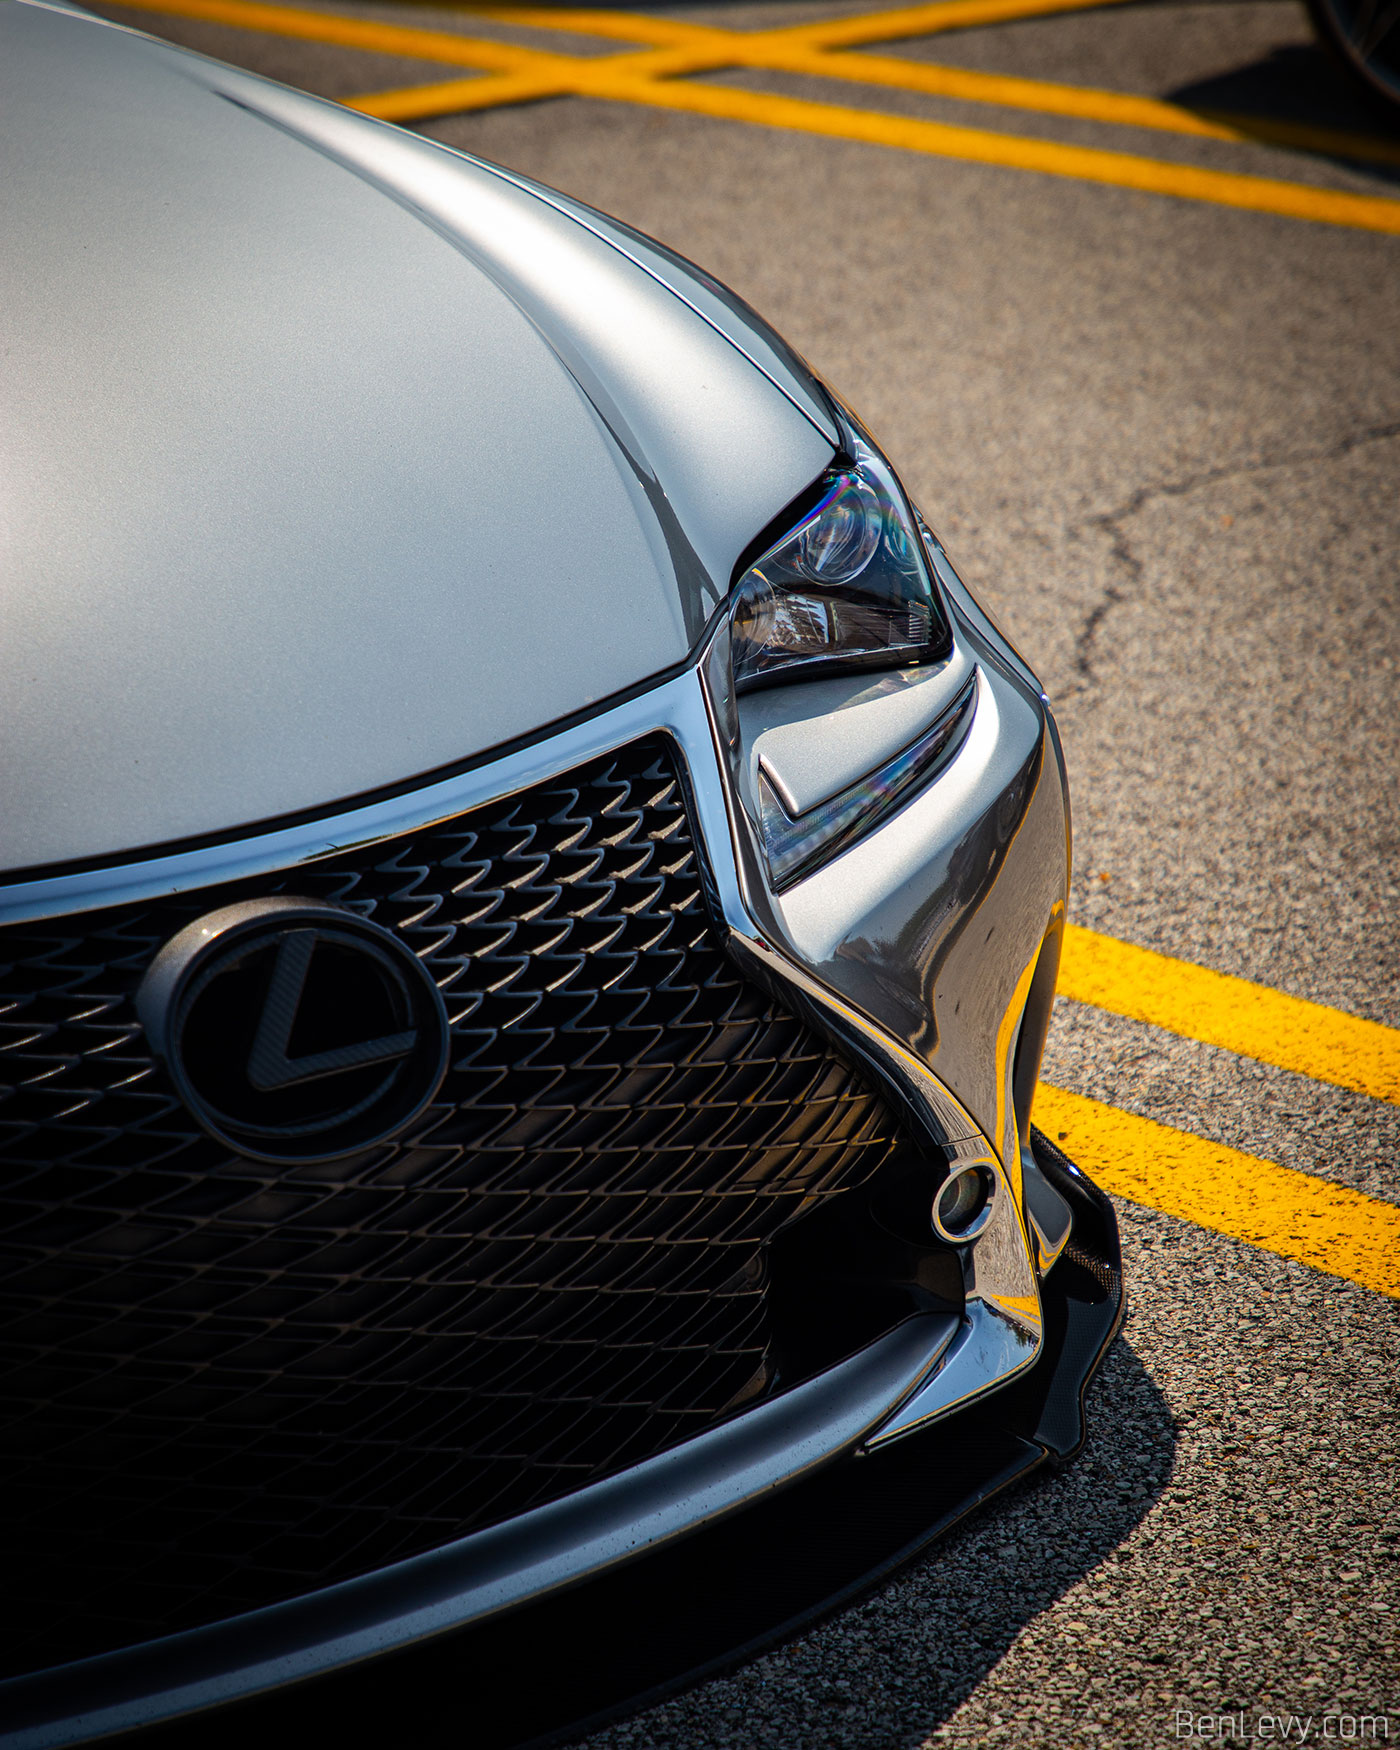 Grill and Headlight of Lexus RC350